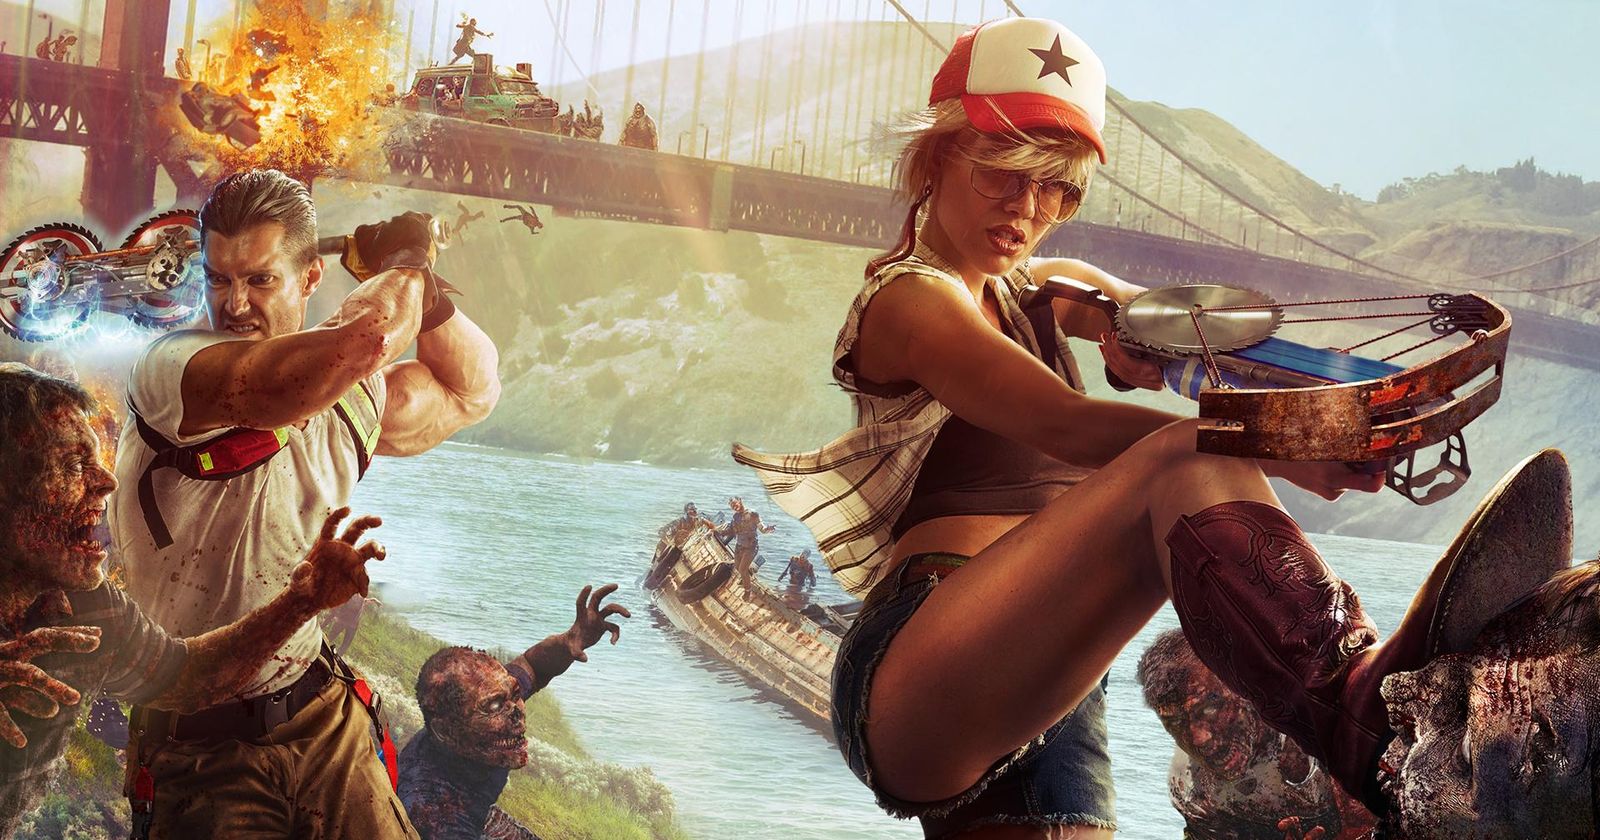 Dead Island 2 Review — Eightify